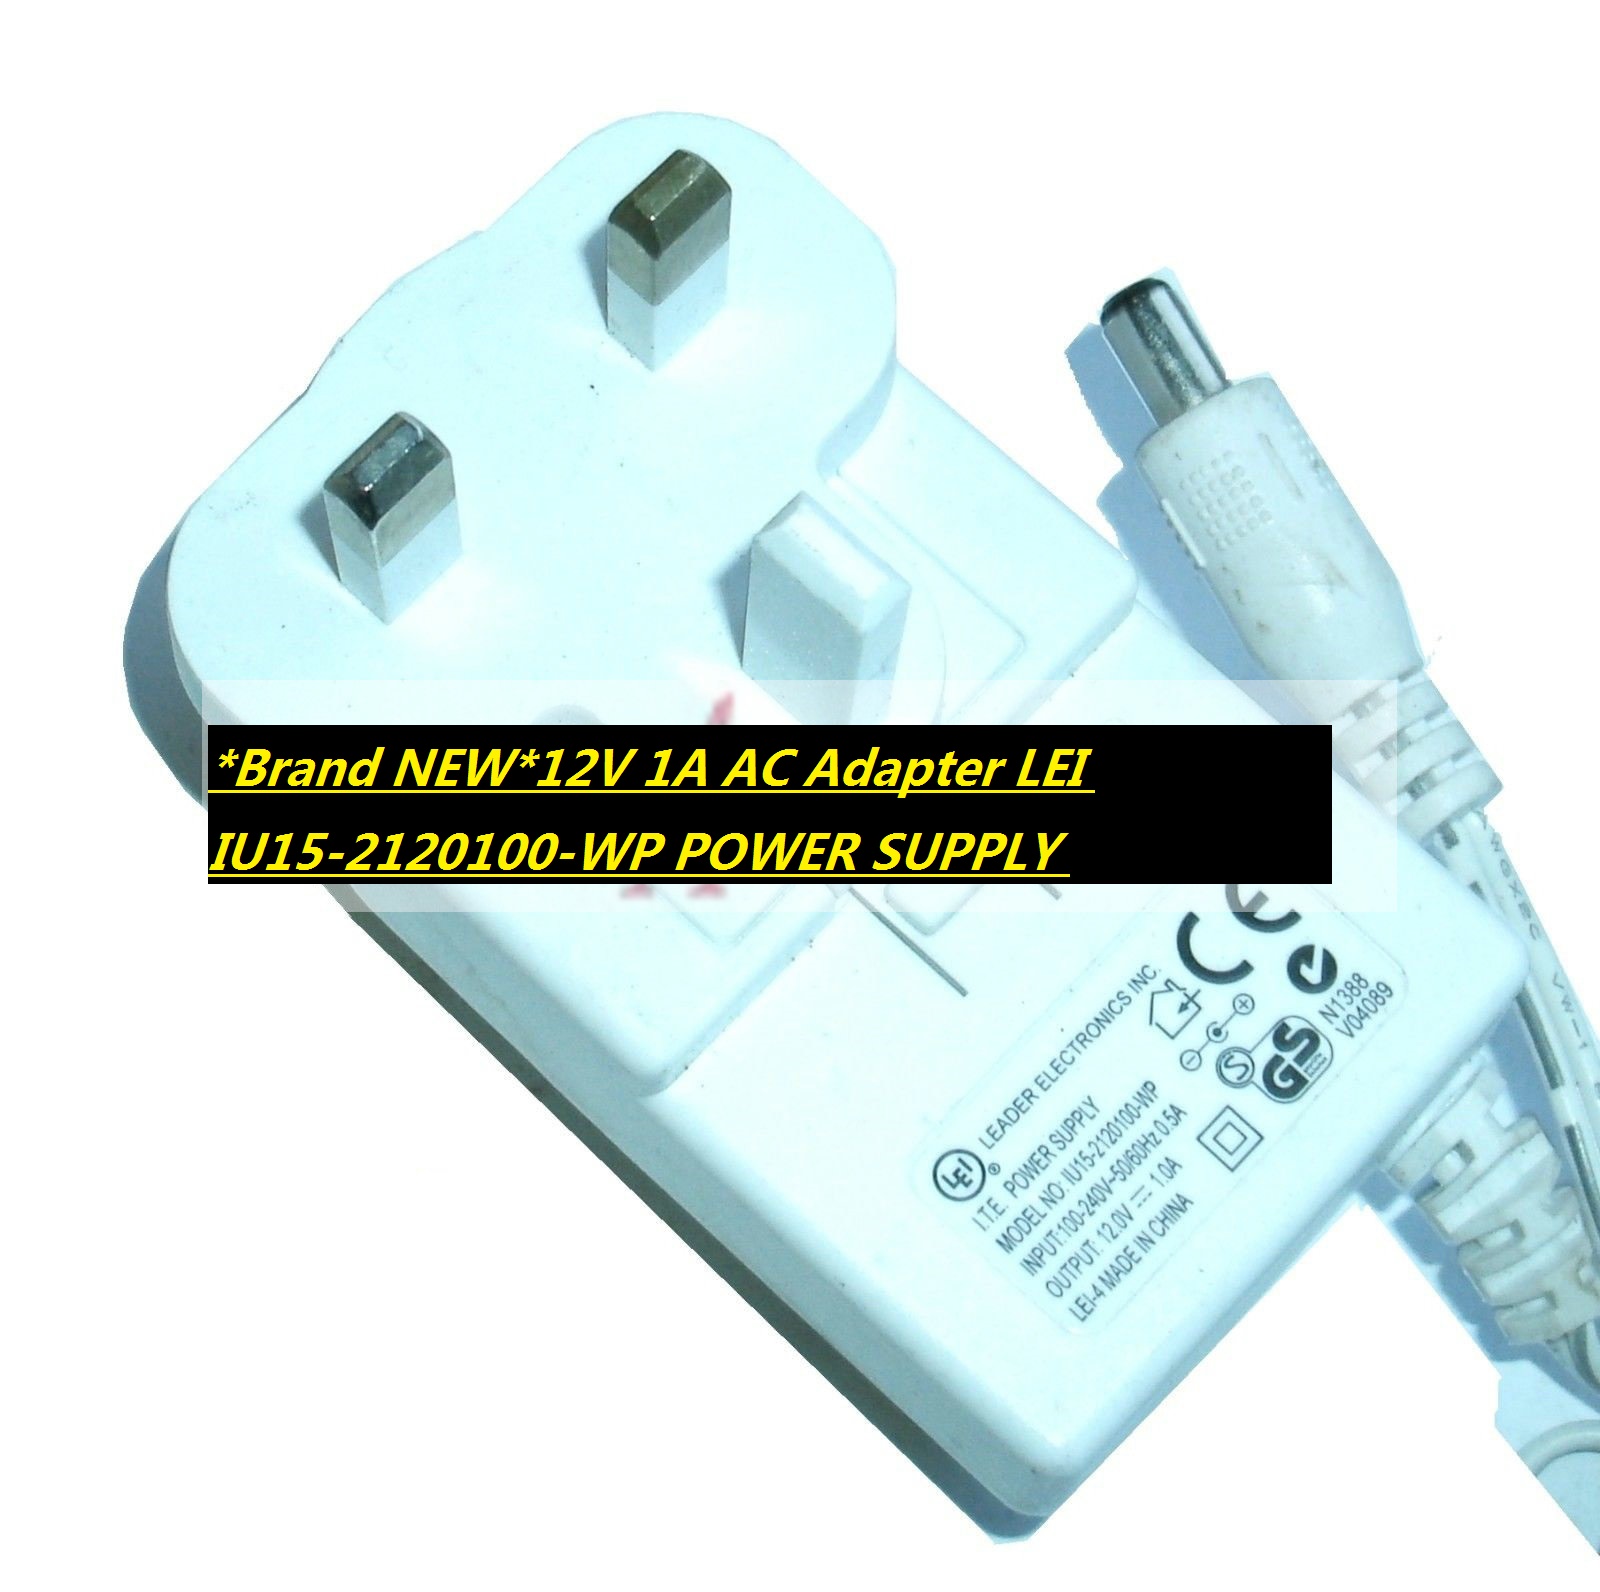 *Brand NEW* 12V 1A AC Adapter LEI IU15-2120100-WP POWER SUPPLY